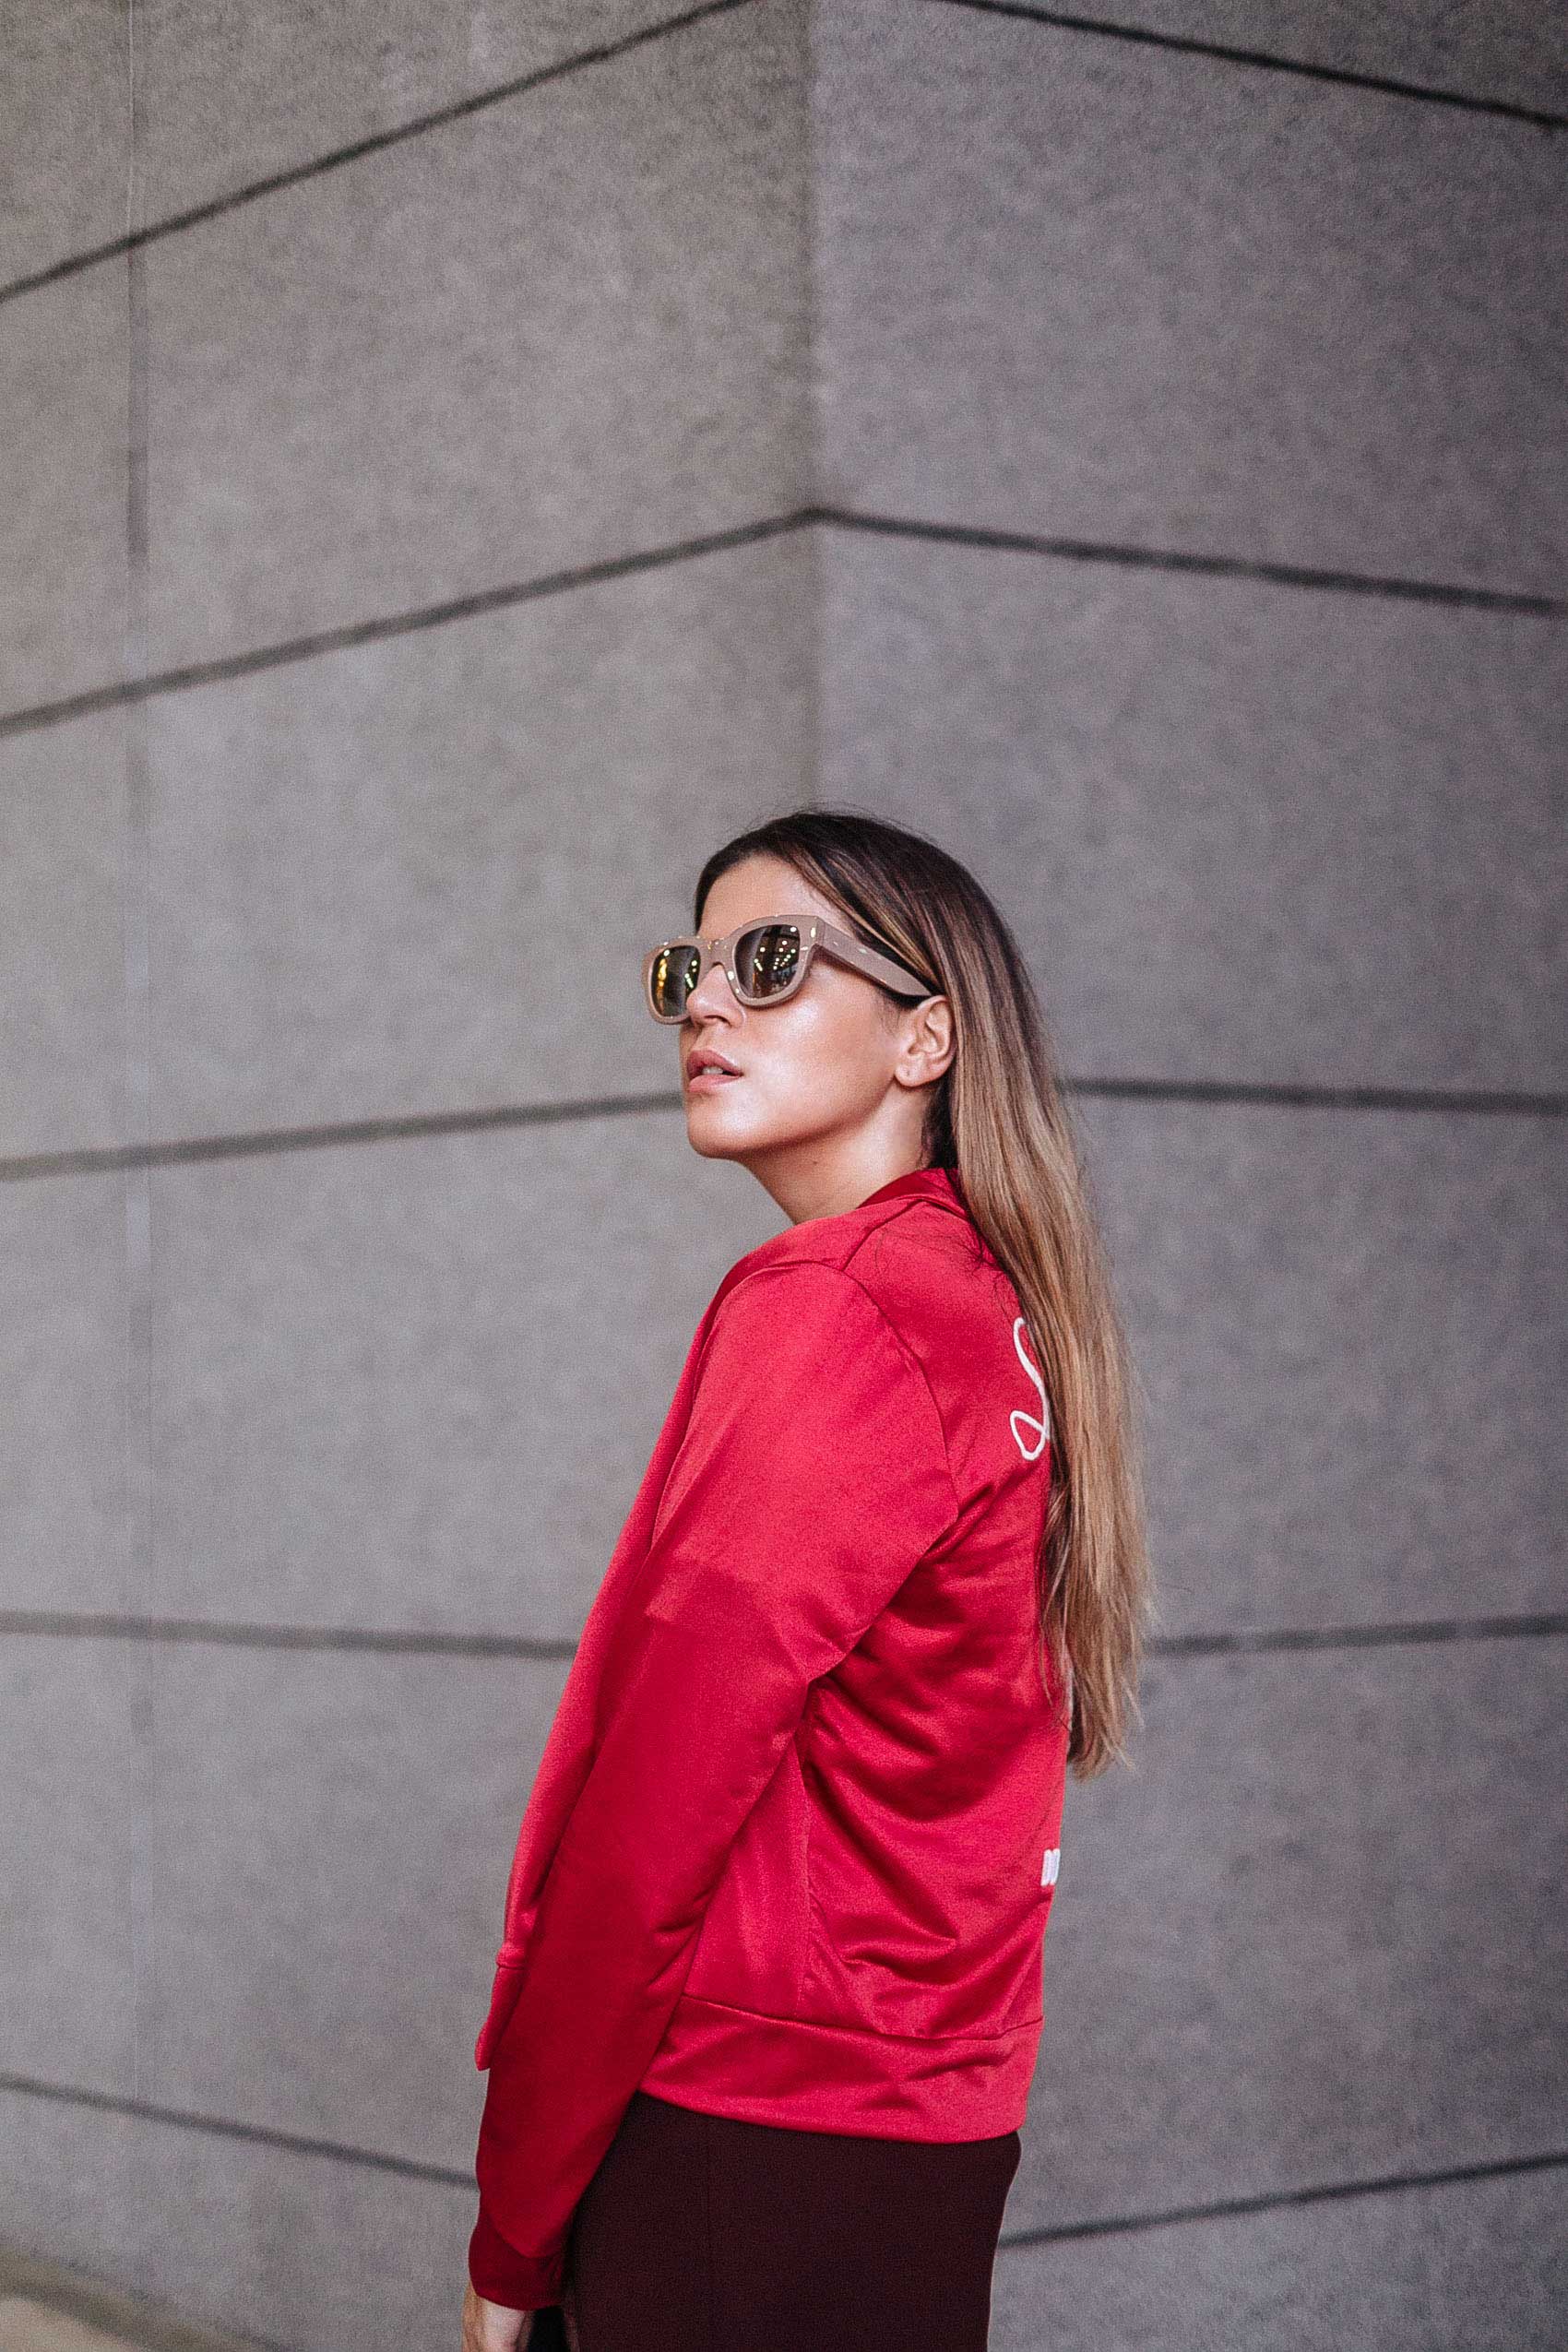 Maristella wearing nude frame mirrored sunglasses from Acne Studios, red satin embroidered jacket from Zara, dark red structured skirt from H&M